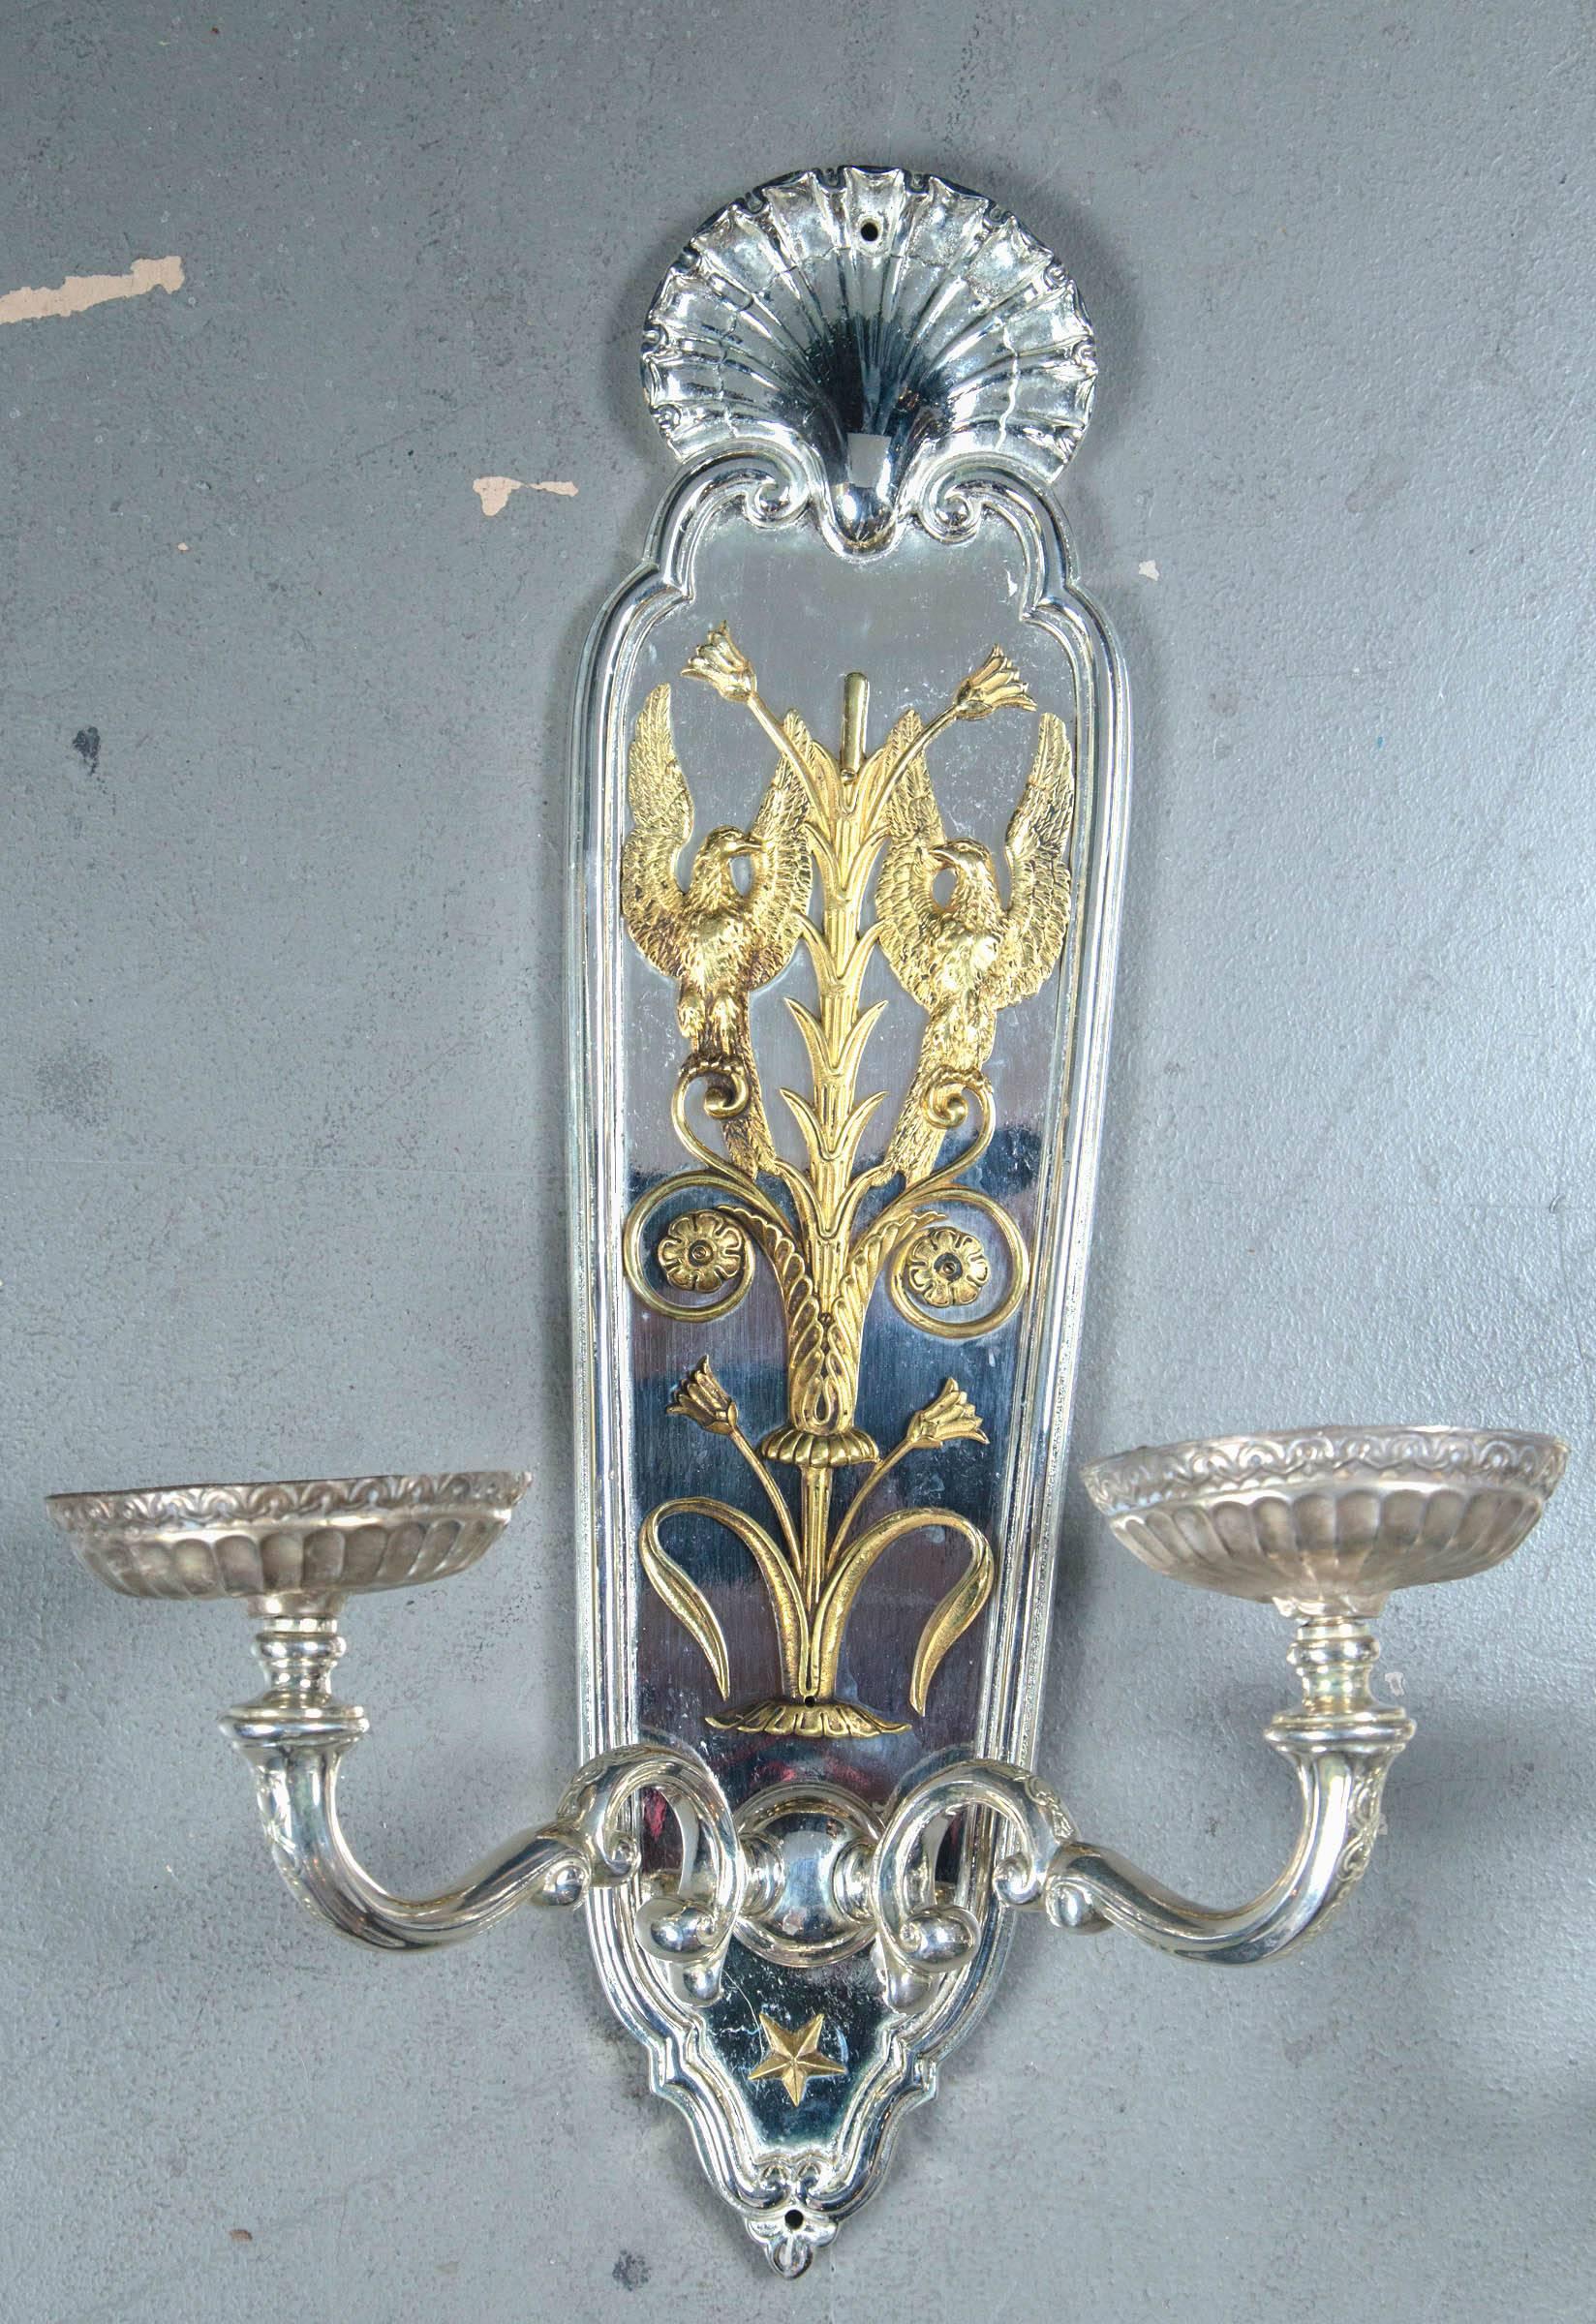 Pair of circa 1920 Silver Plated Caldwell Sconces with Gilt Bronze Design In Excellent Condition For Sale In Stamford, CT